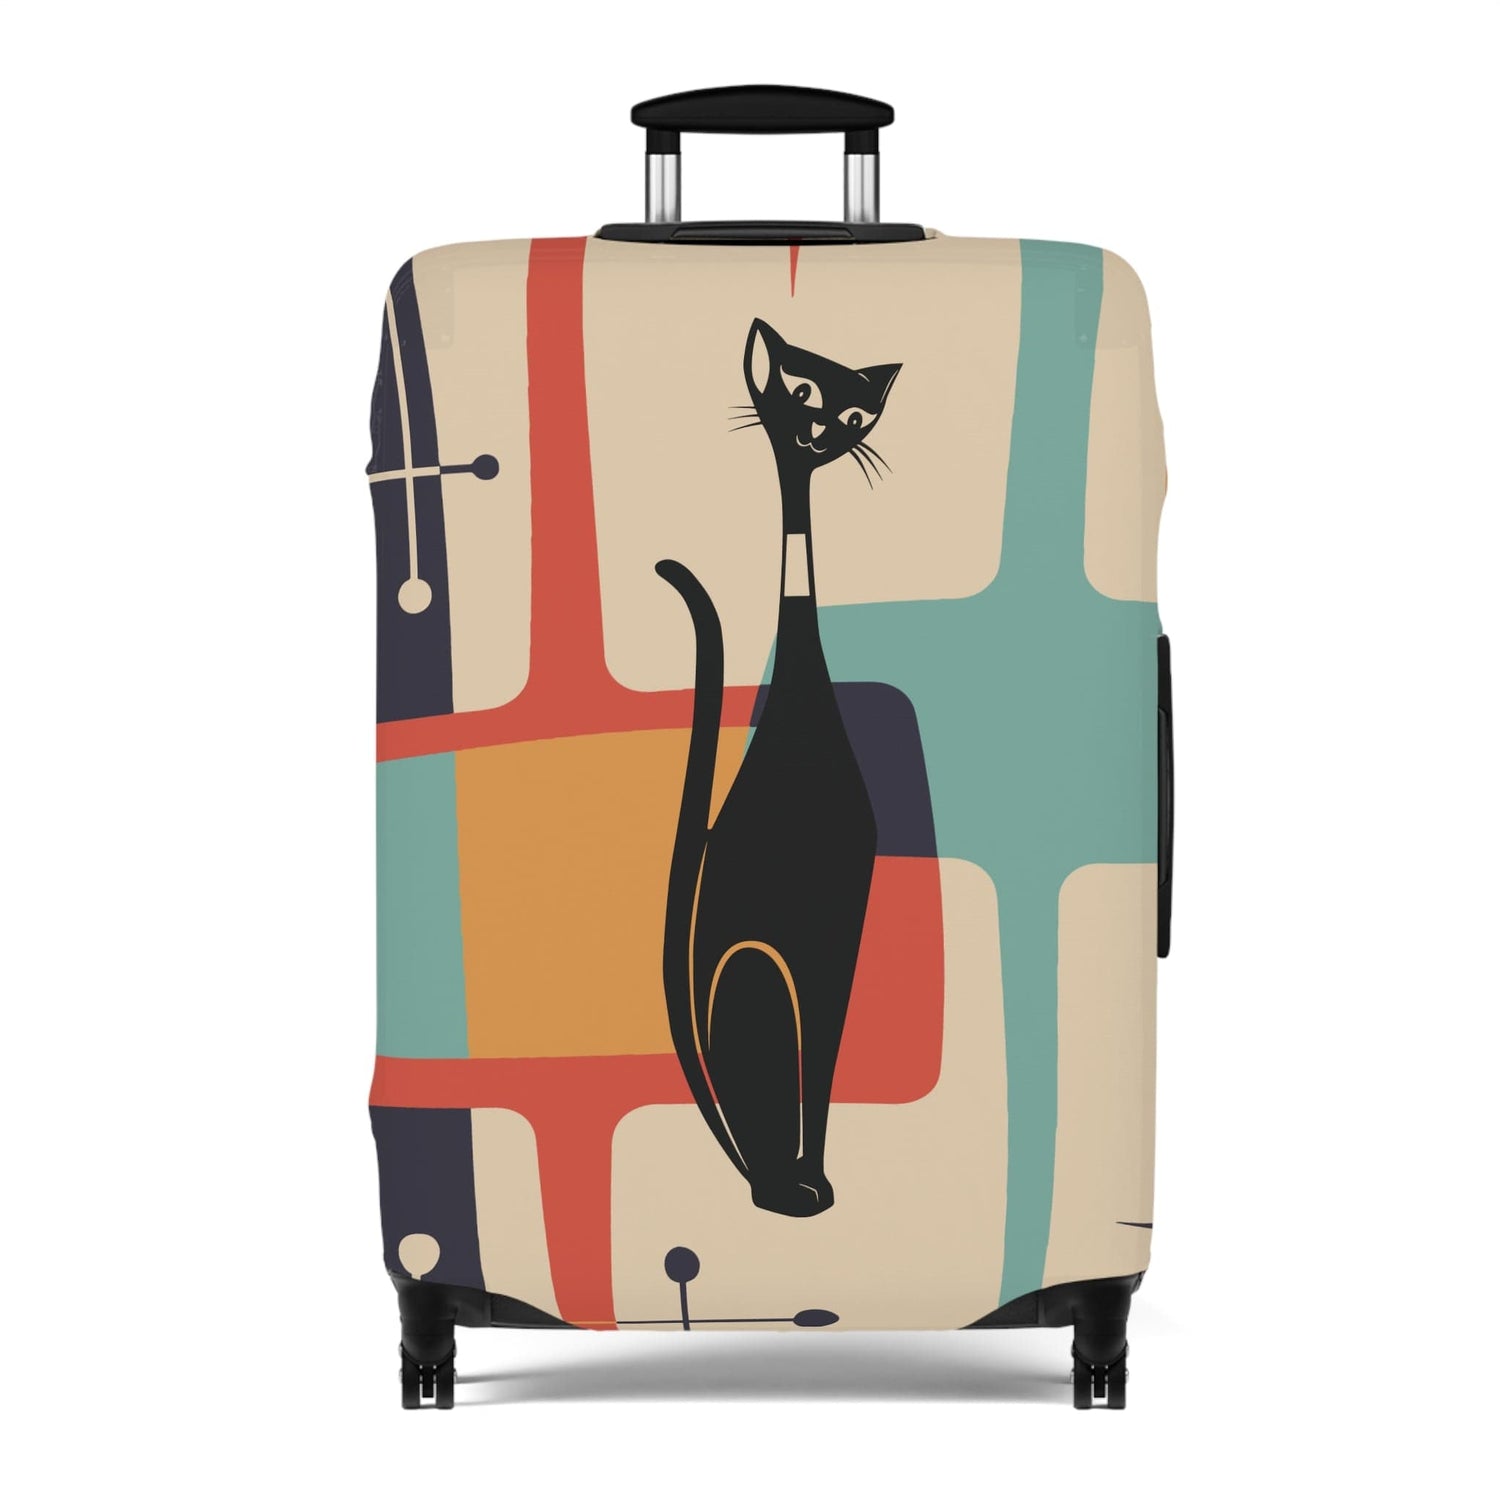 Kate McEnroe New York Retro Atomic Cat Luggage Cover, Mid-Century Teal &amp; Mustard Design, Vintage Style Suitcase Protector Luggage Covers